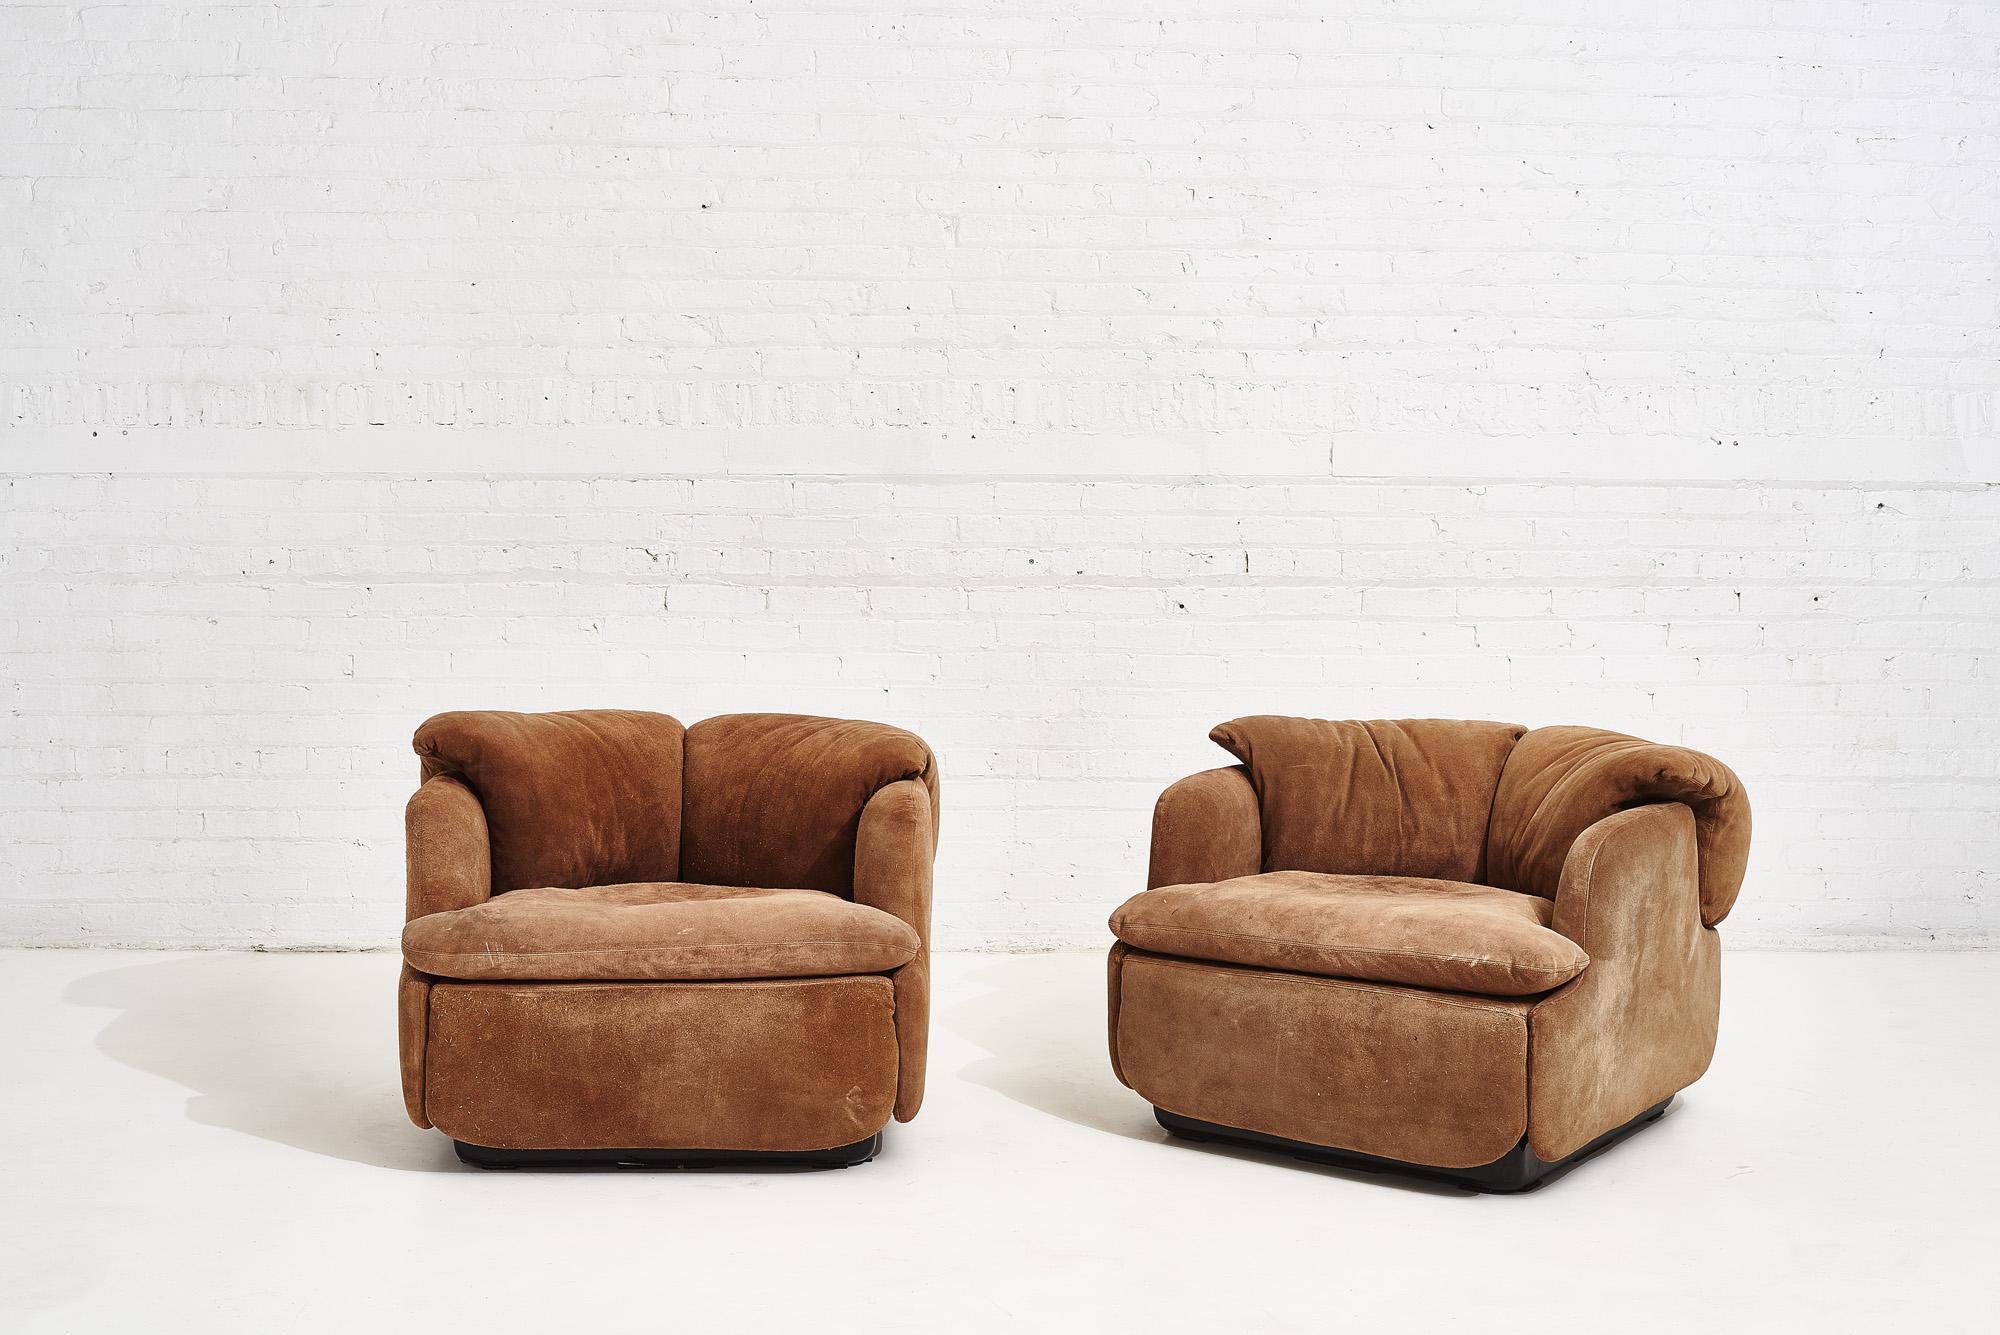 Alberto Rosselli for Saporiti Brown Suede “Confidential” lounge chairs, 1972. Perfectly worn original suede, “broken in” patina.